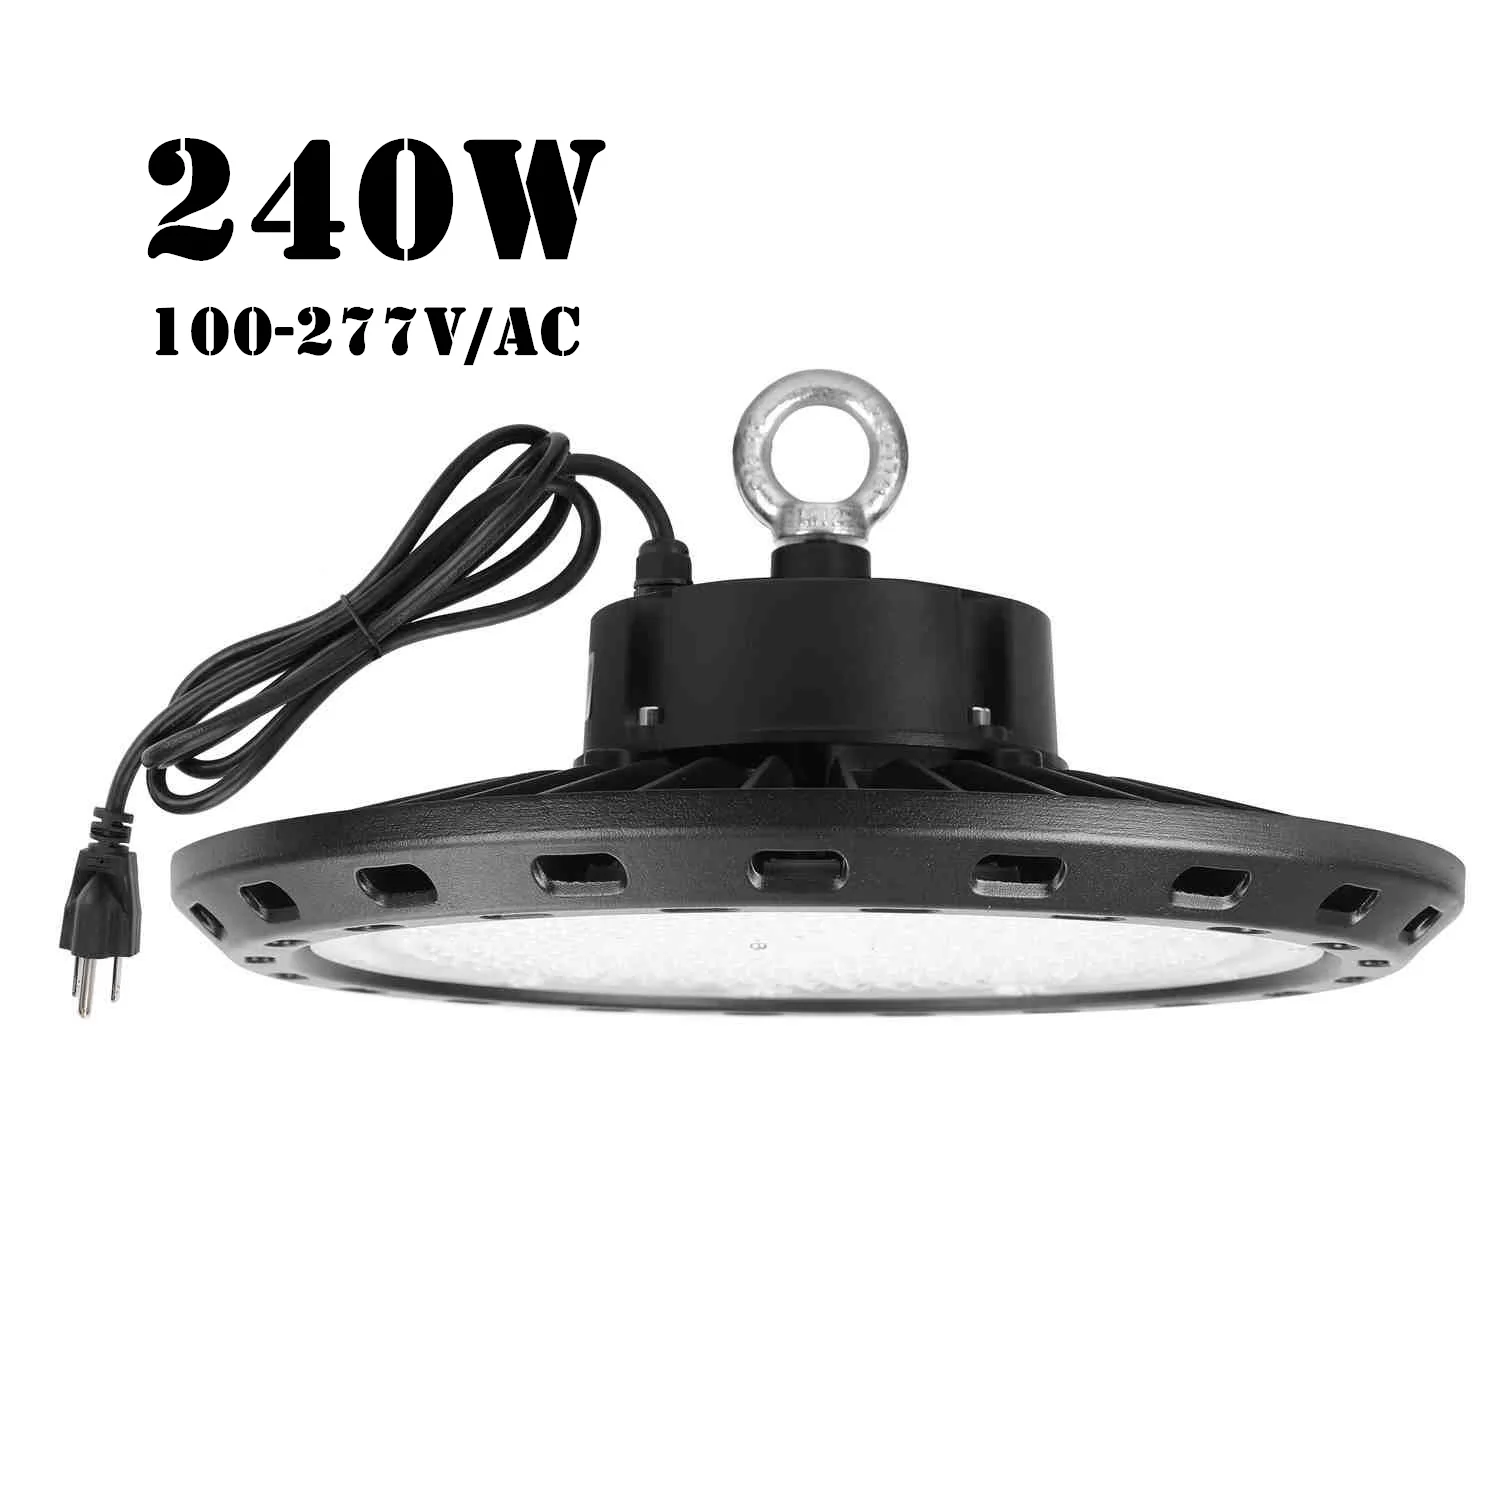 240W UFO LED High Bay Light 5000K 130lm/w Day White 5ft Cable with 110V Plug, Hanging Hook, Safe Rope, LED Light for Factory Warehouse Church QC-HB24F